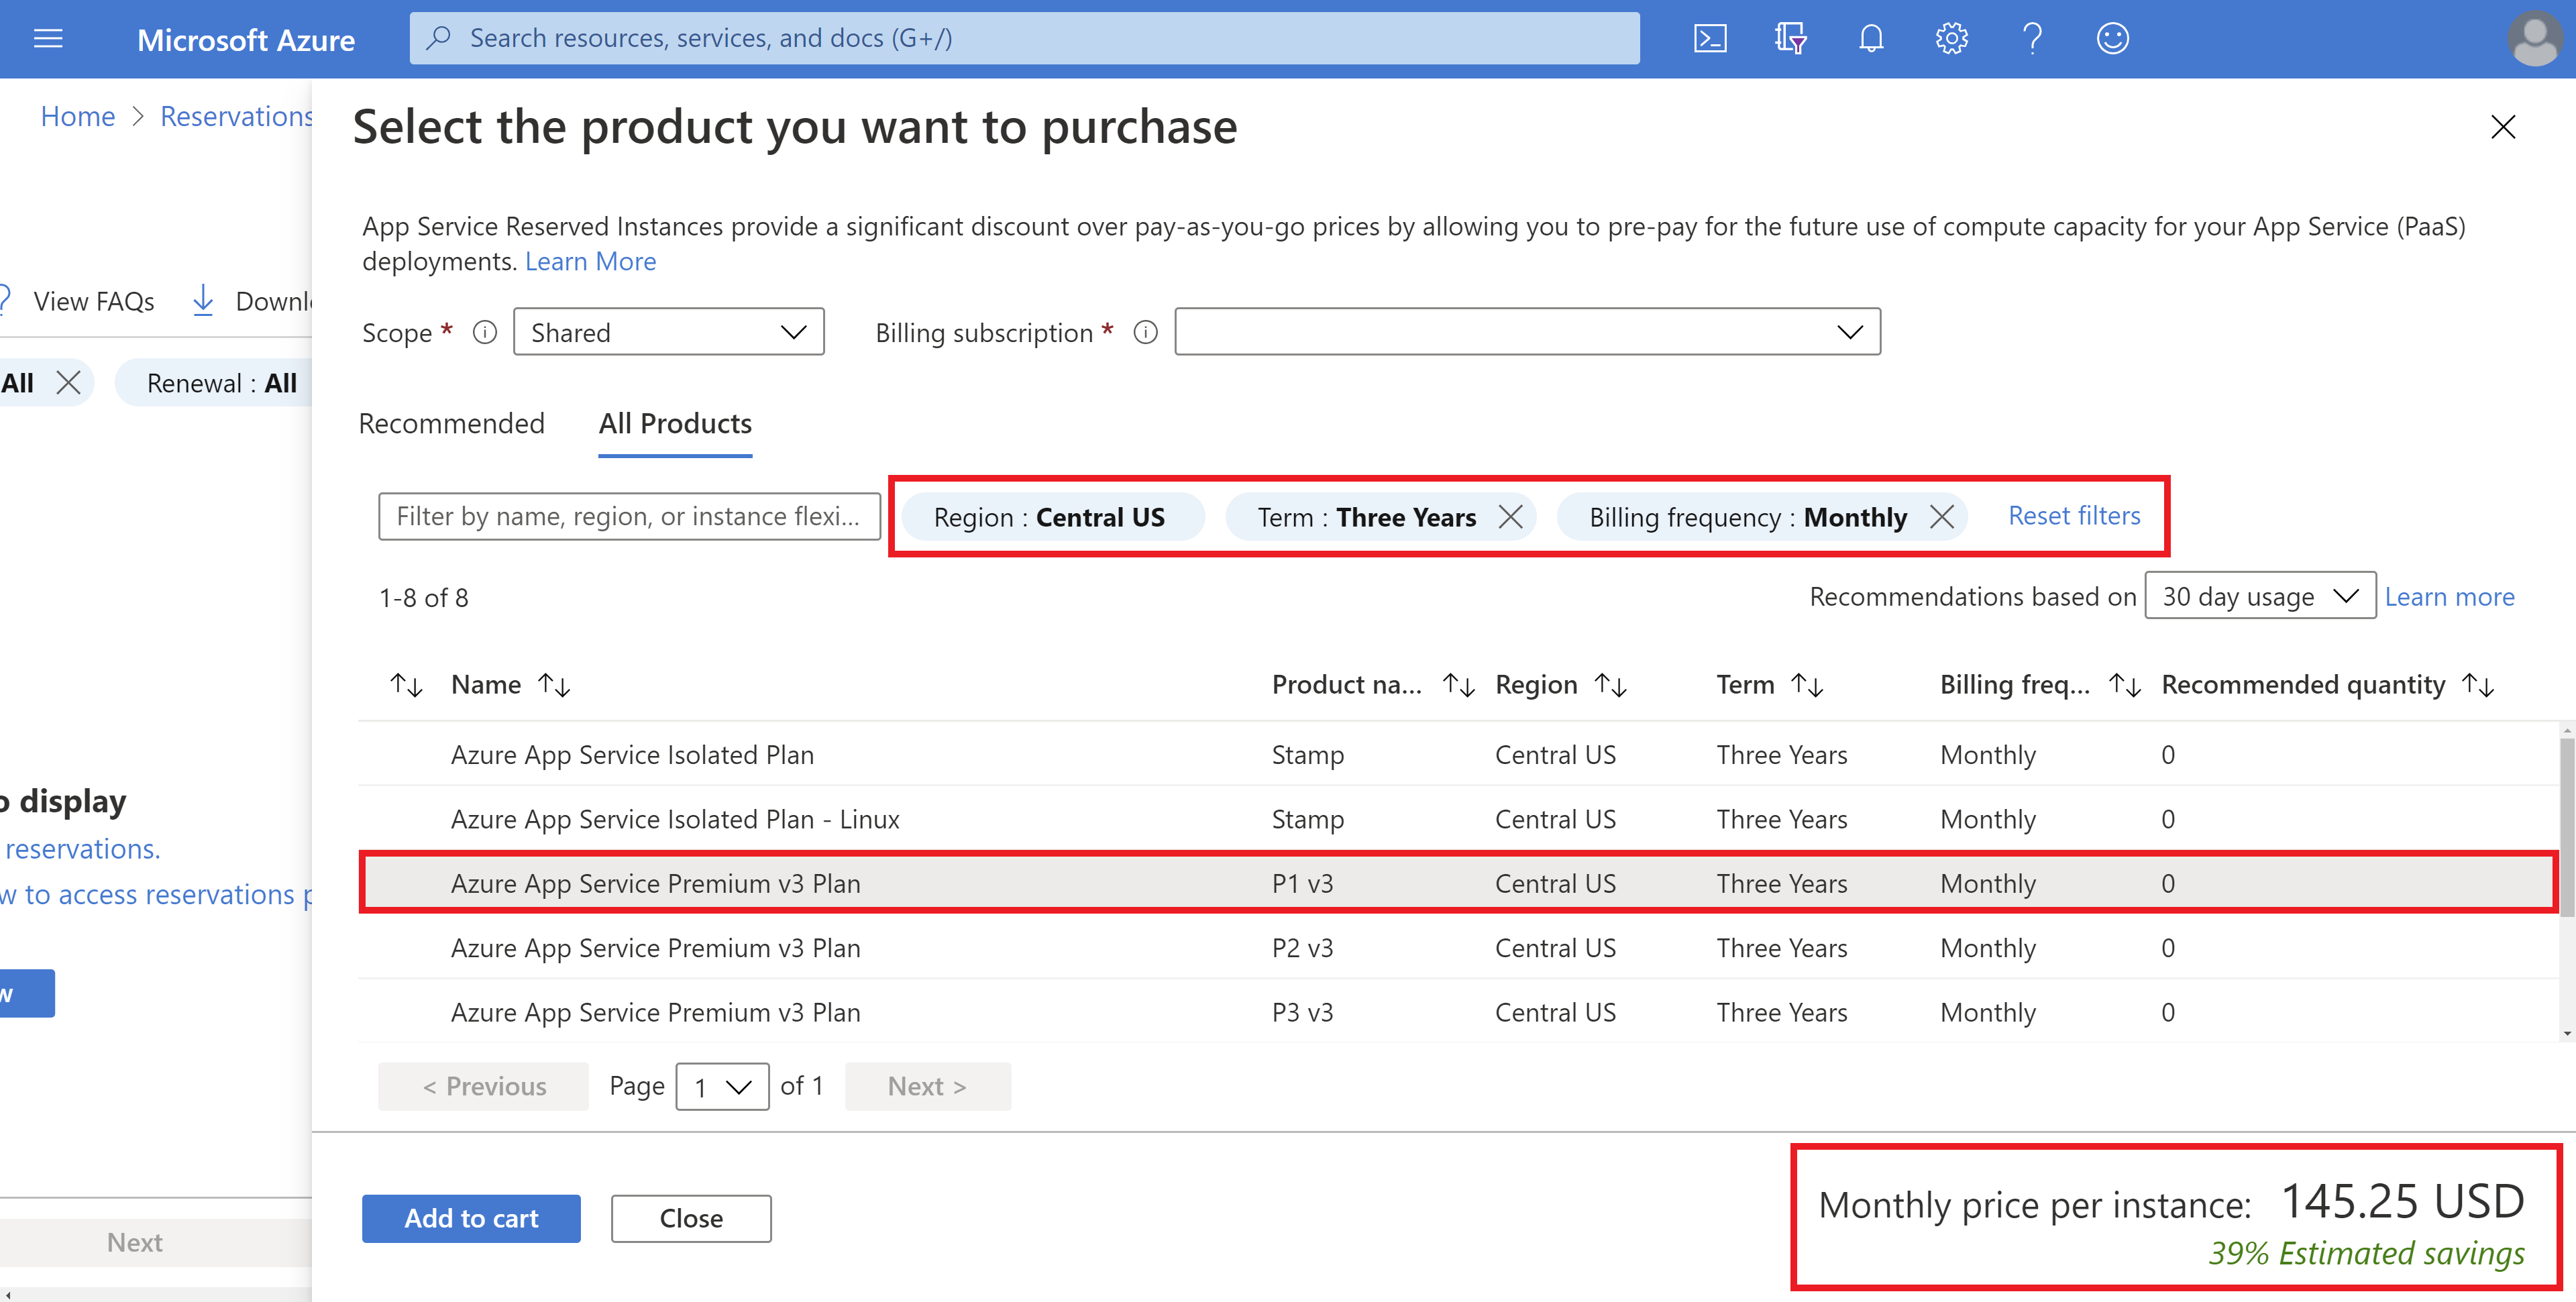 How to buy Reserved Instances - Select Windows